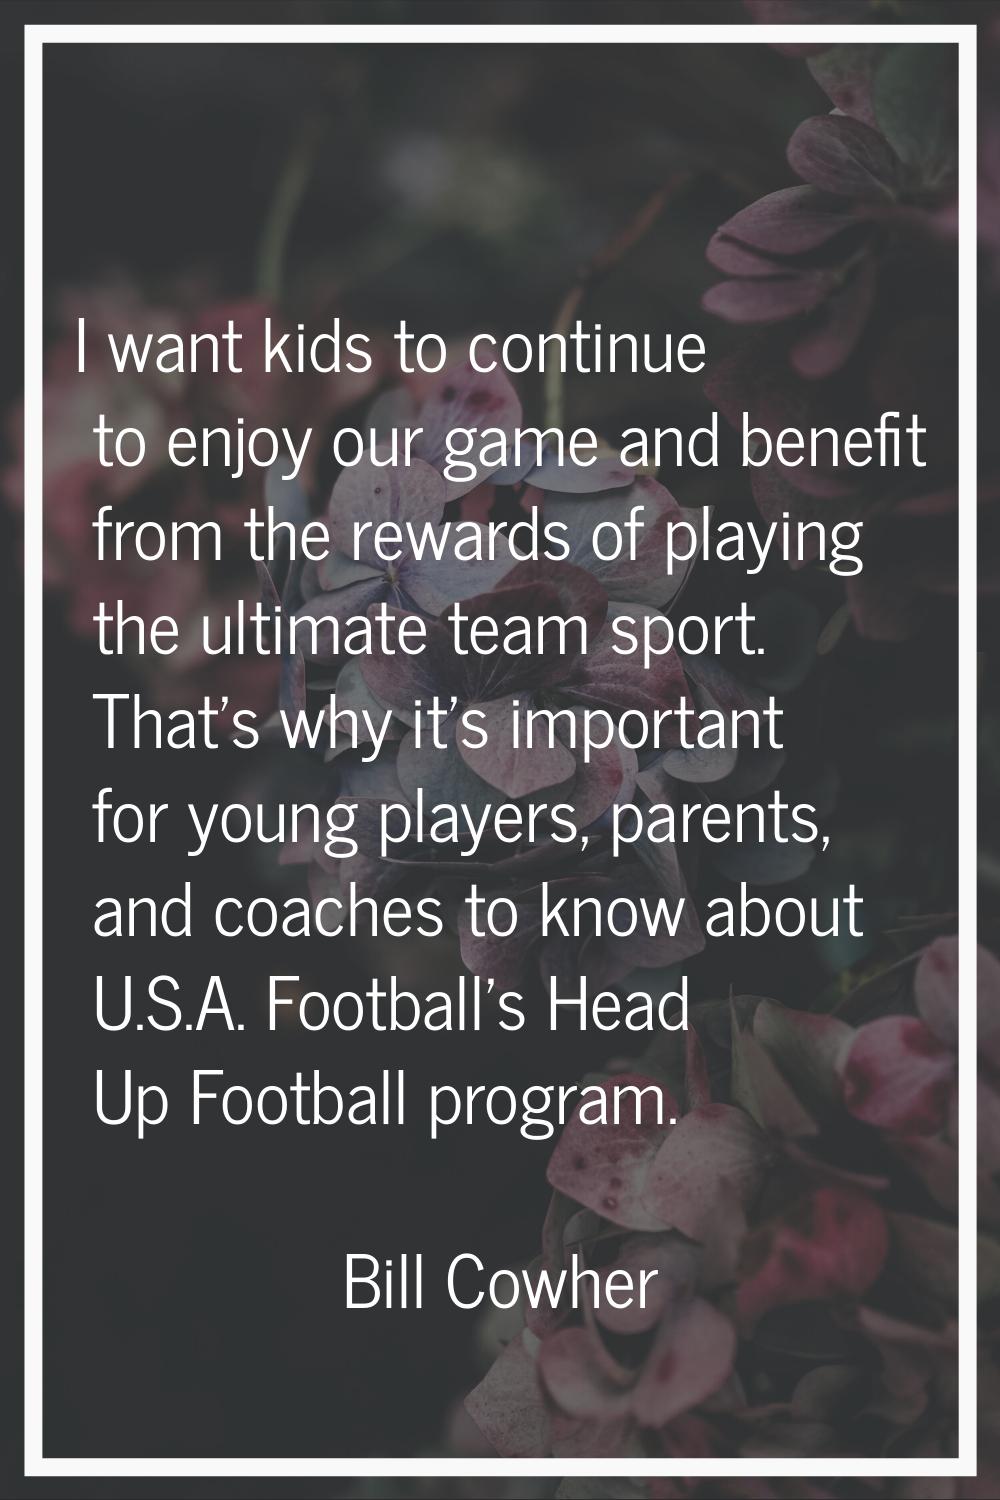 I want kids to continue to enjoy our game and benefit from the rewards of playing the ultimate team